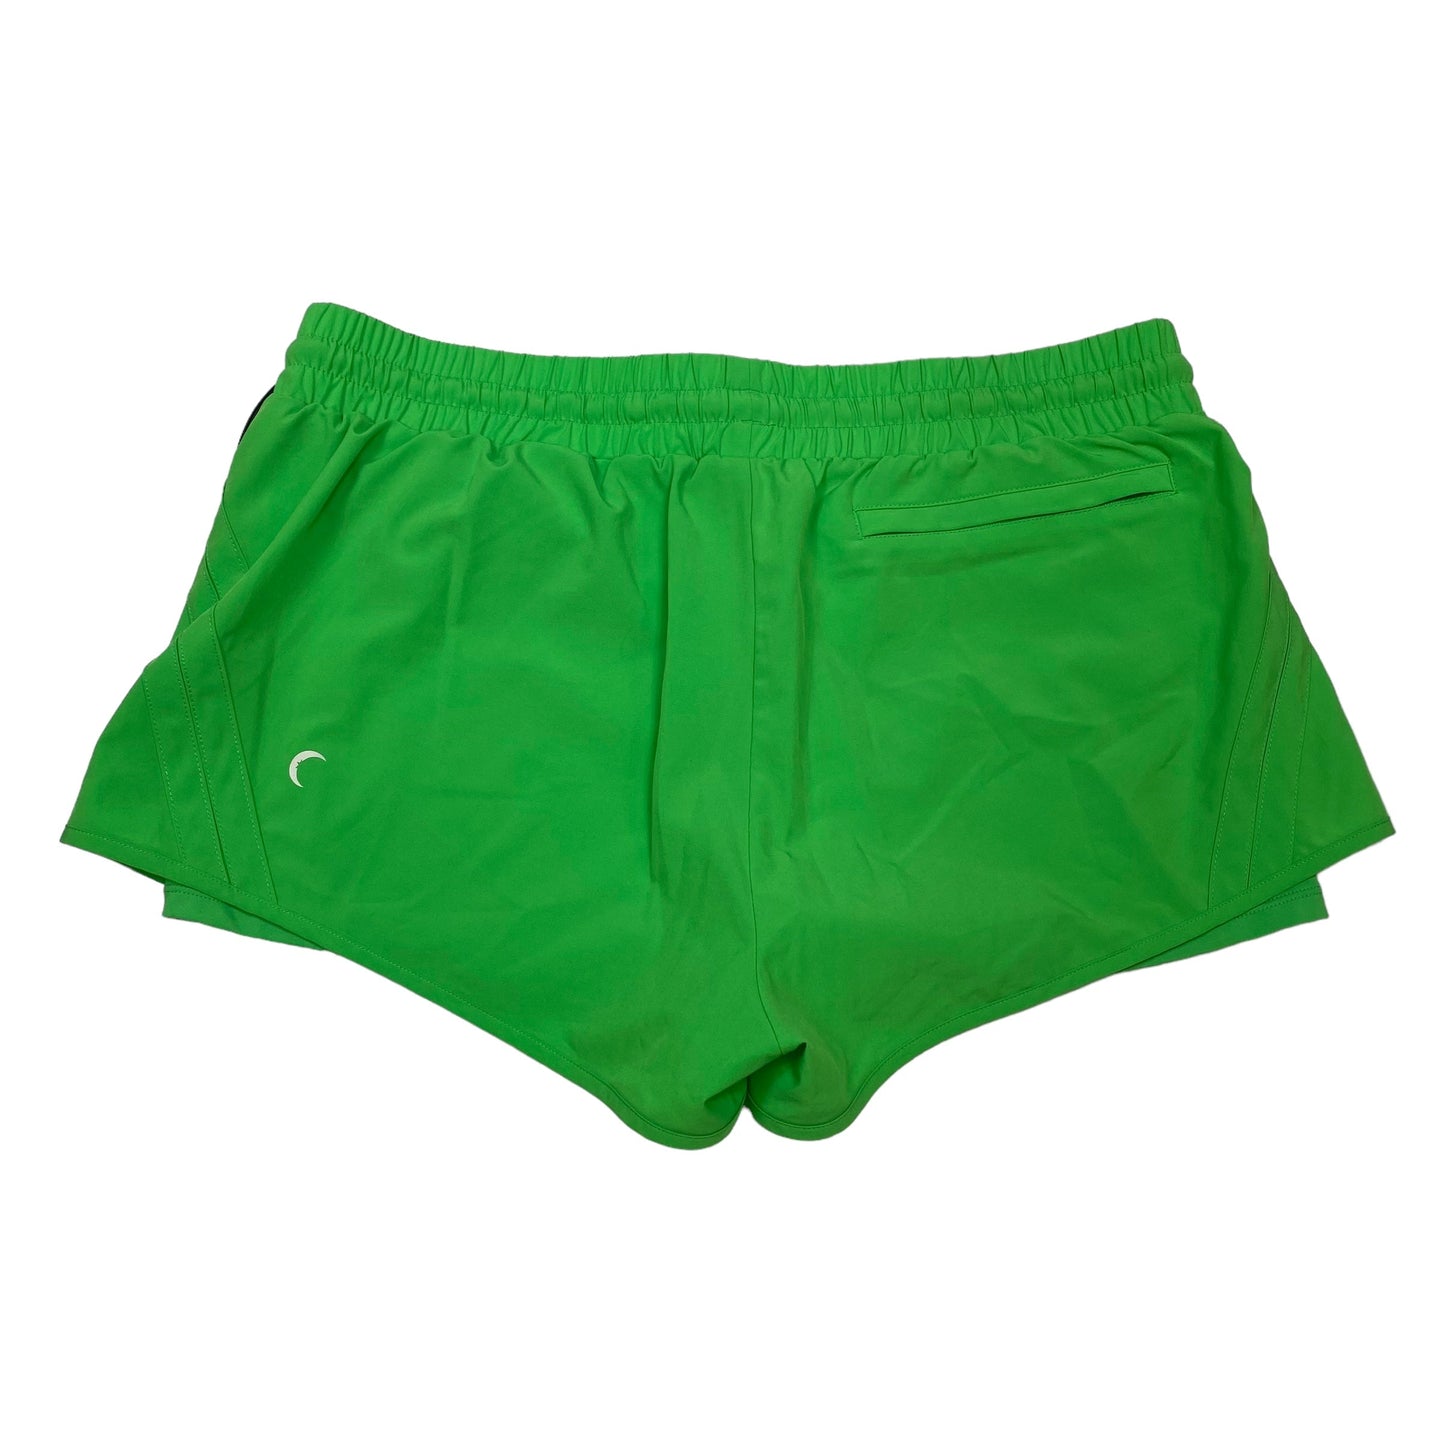 Green Athletic Shorts Zyia, Size L